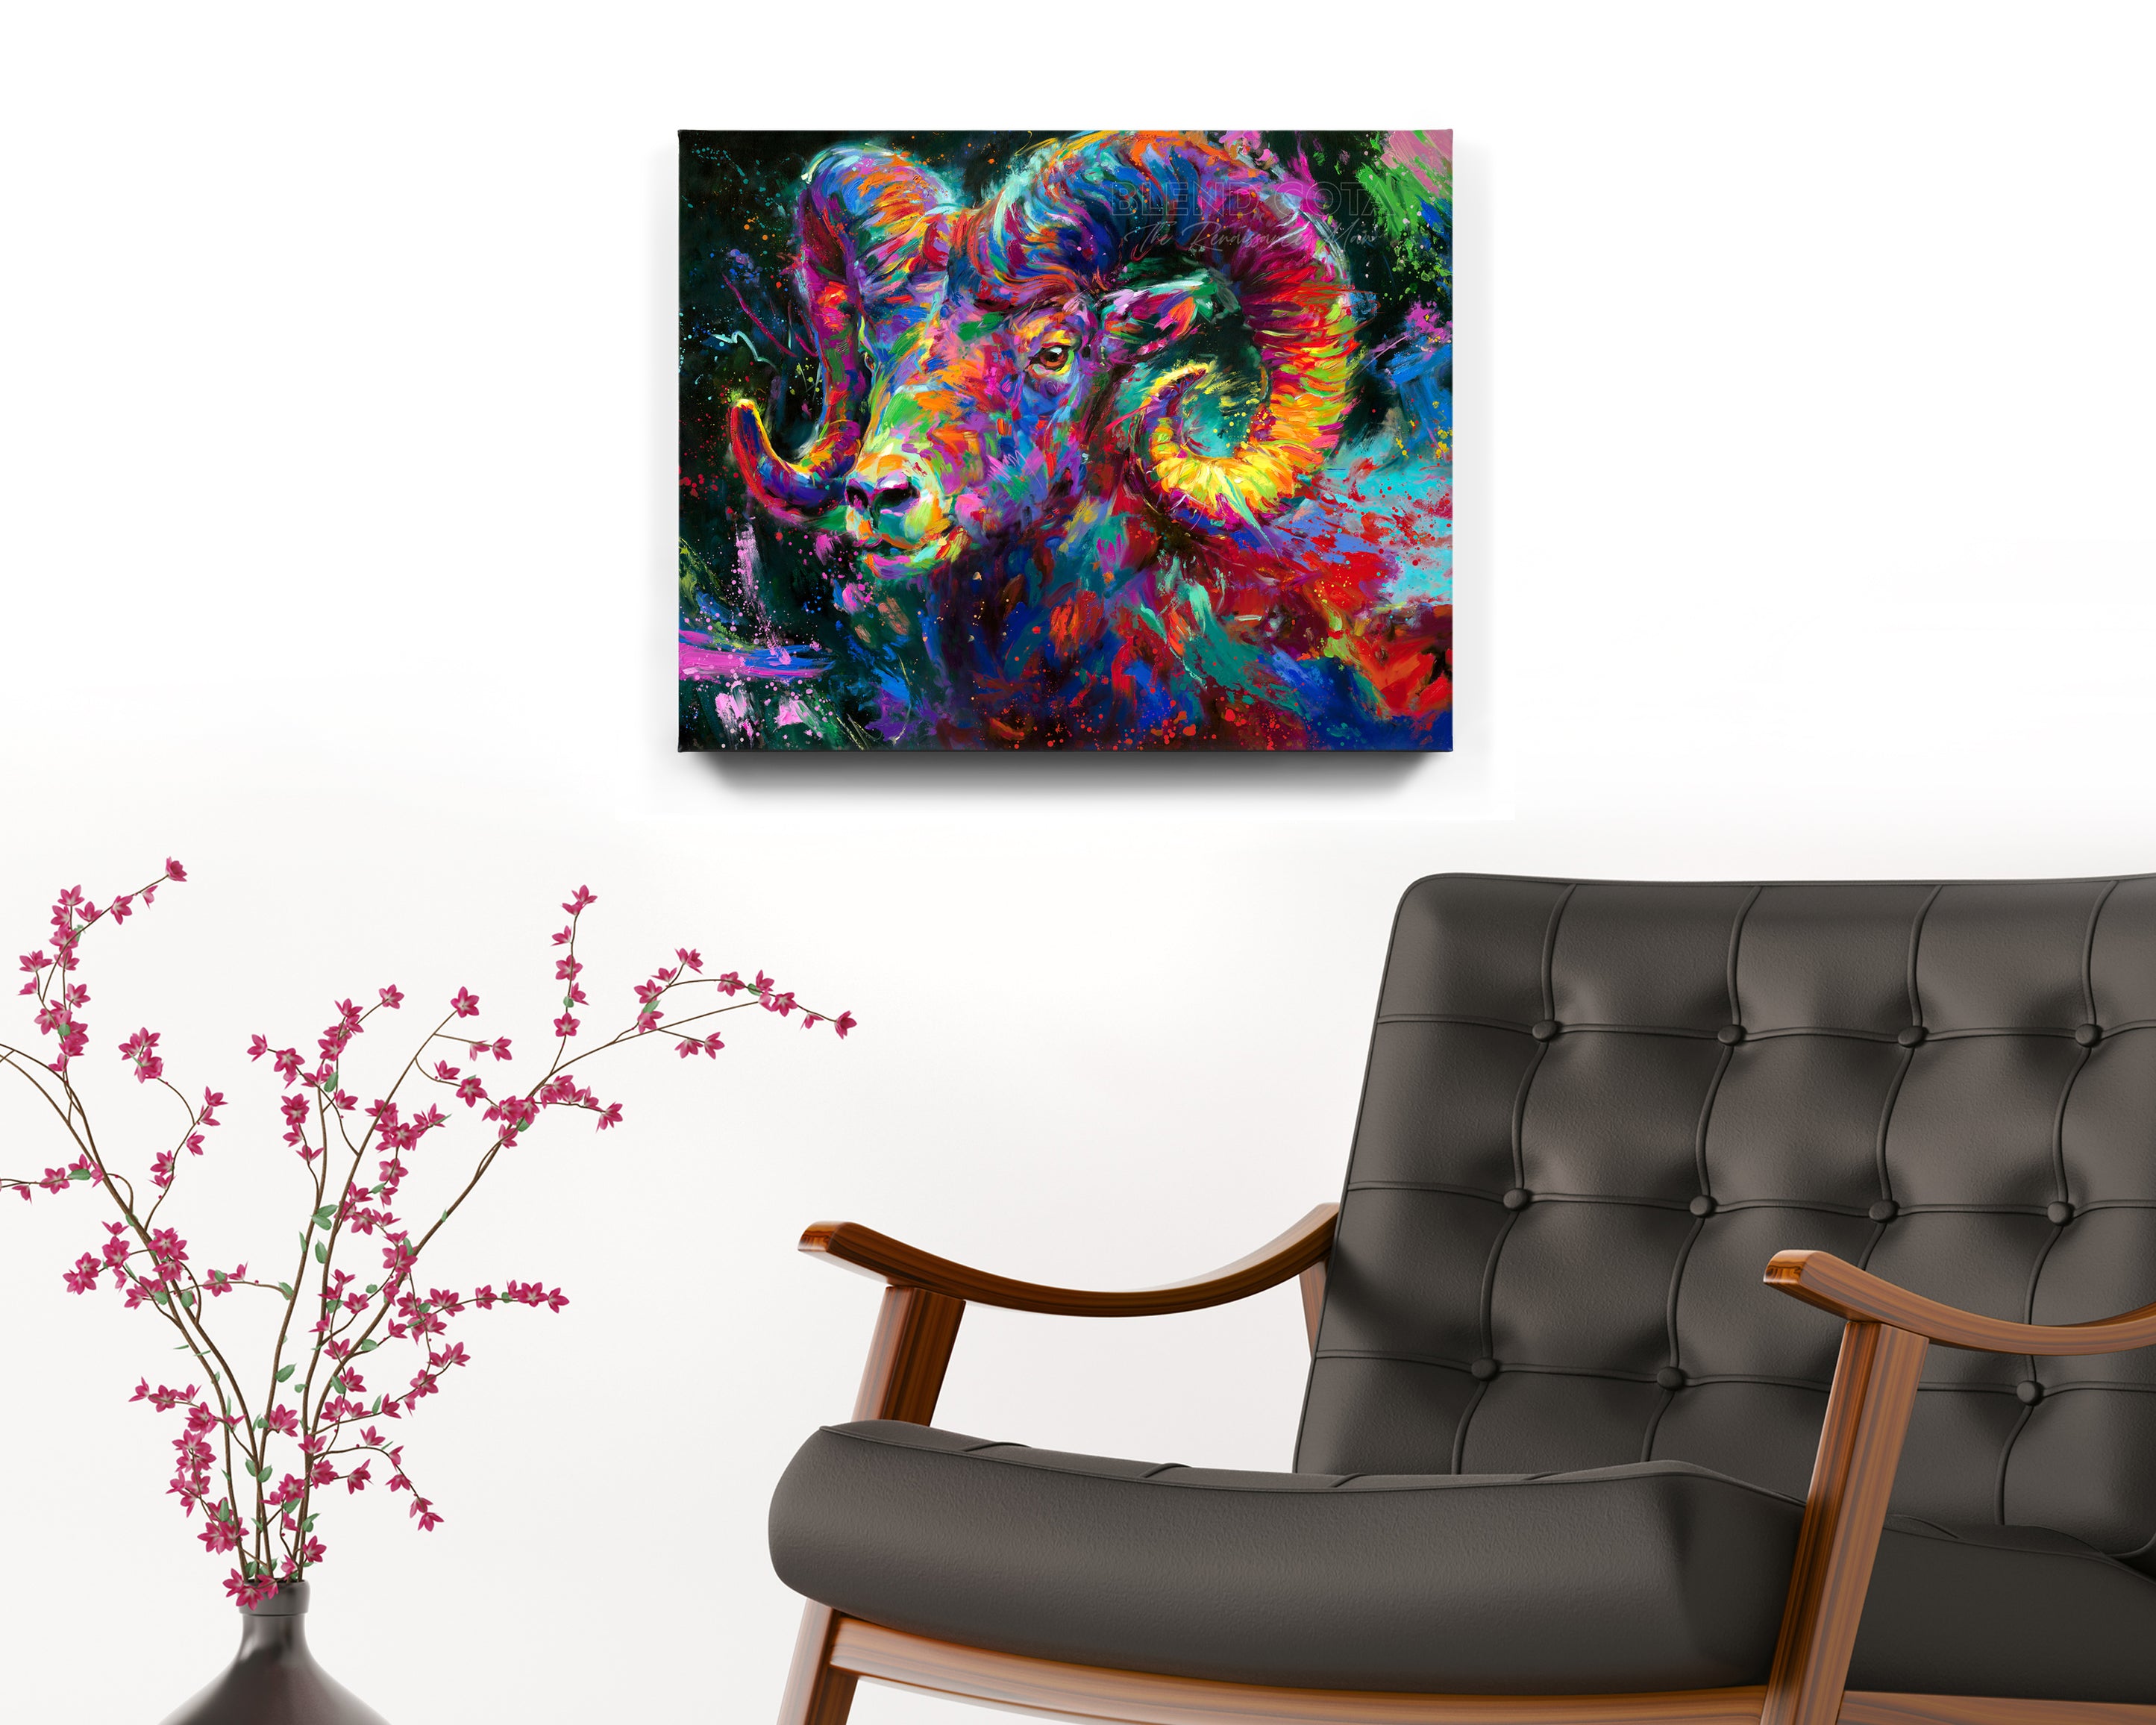 The Ram Spirit painted by Blend Cota Art Print on metal from Blend Cota Studios with painting hanging on a white wall behind a black leather armchair